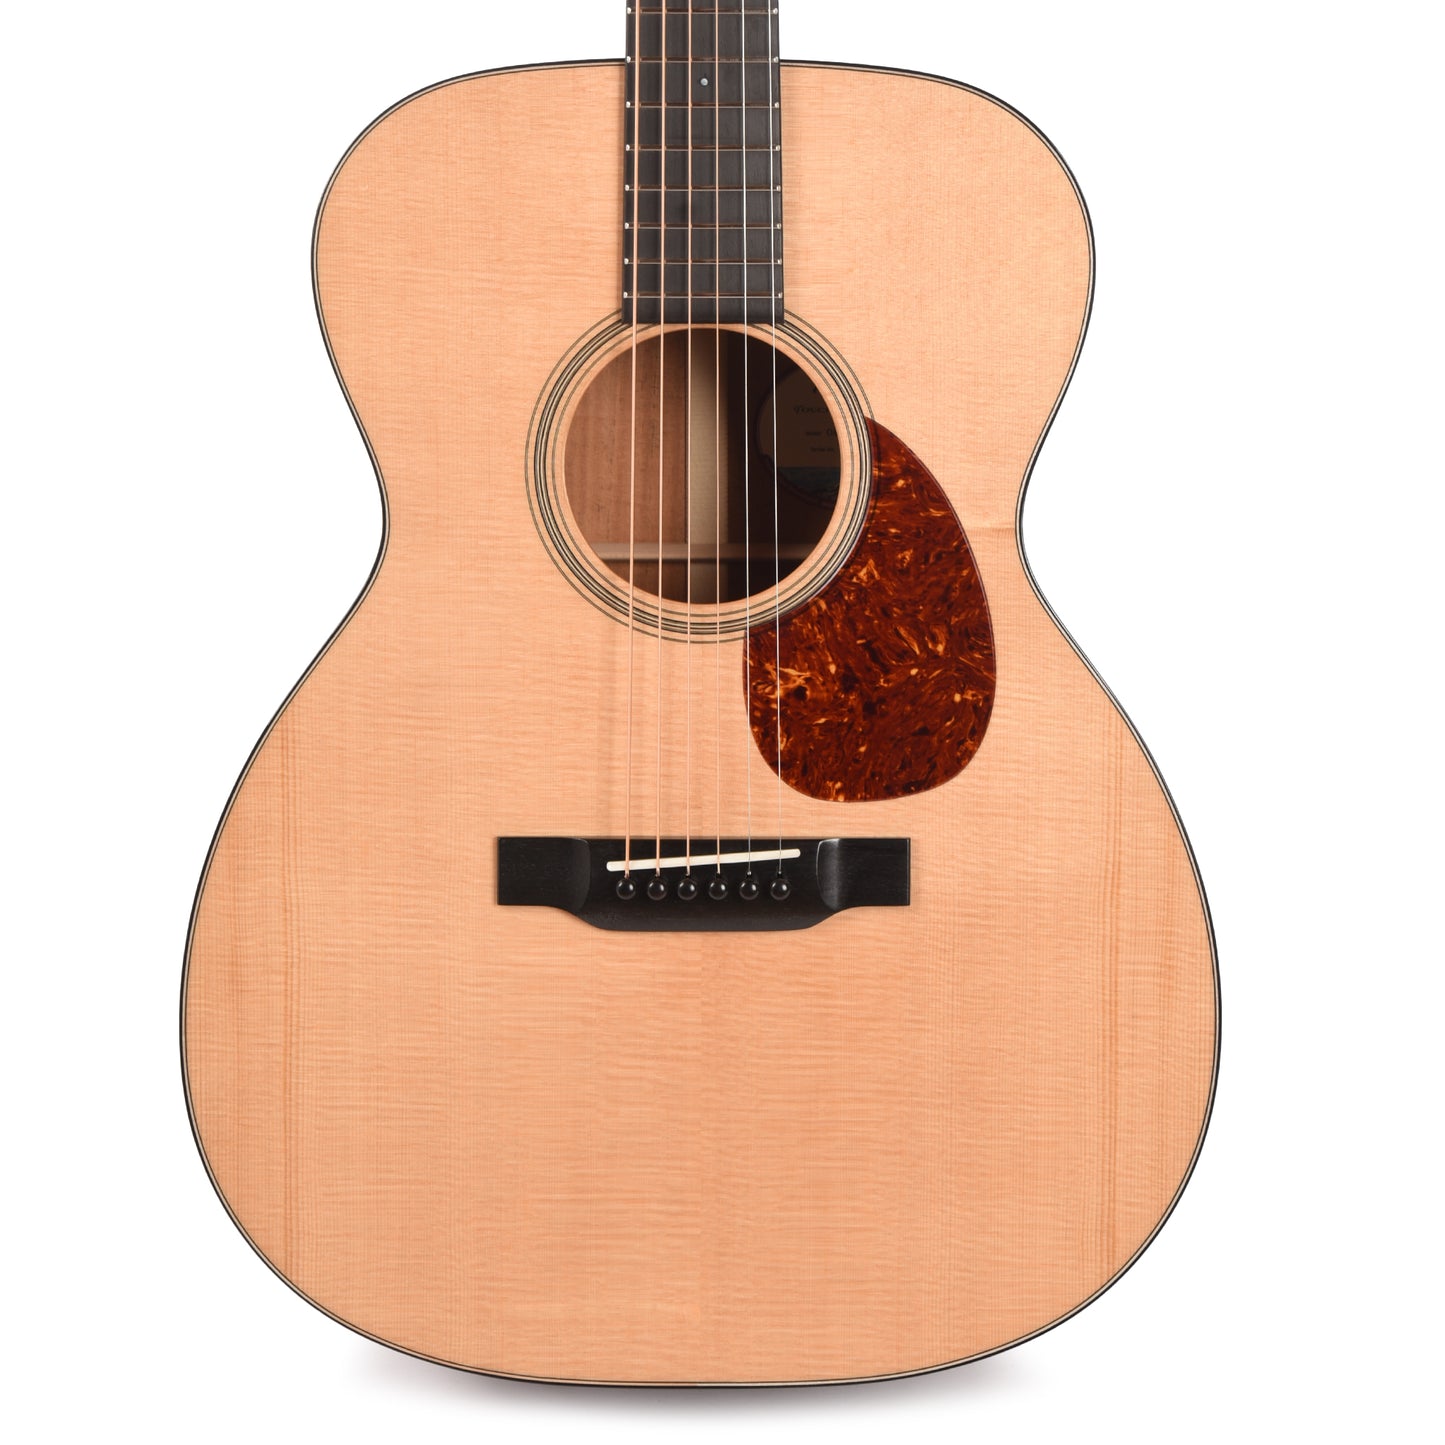 Bourgeois Touchstone Country Boy OM Alaskan Sitka/Mahogany Natural